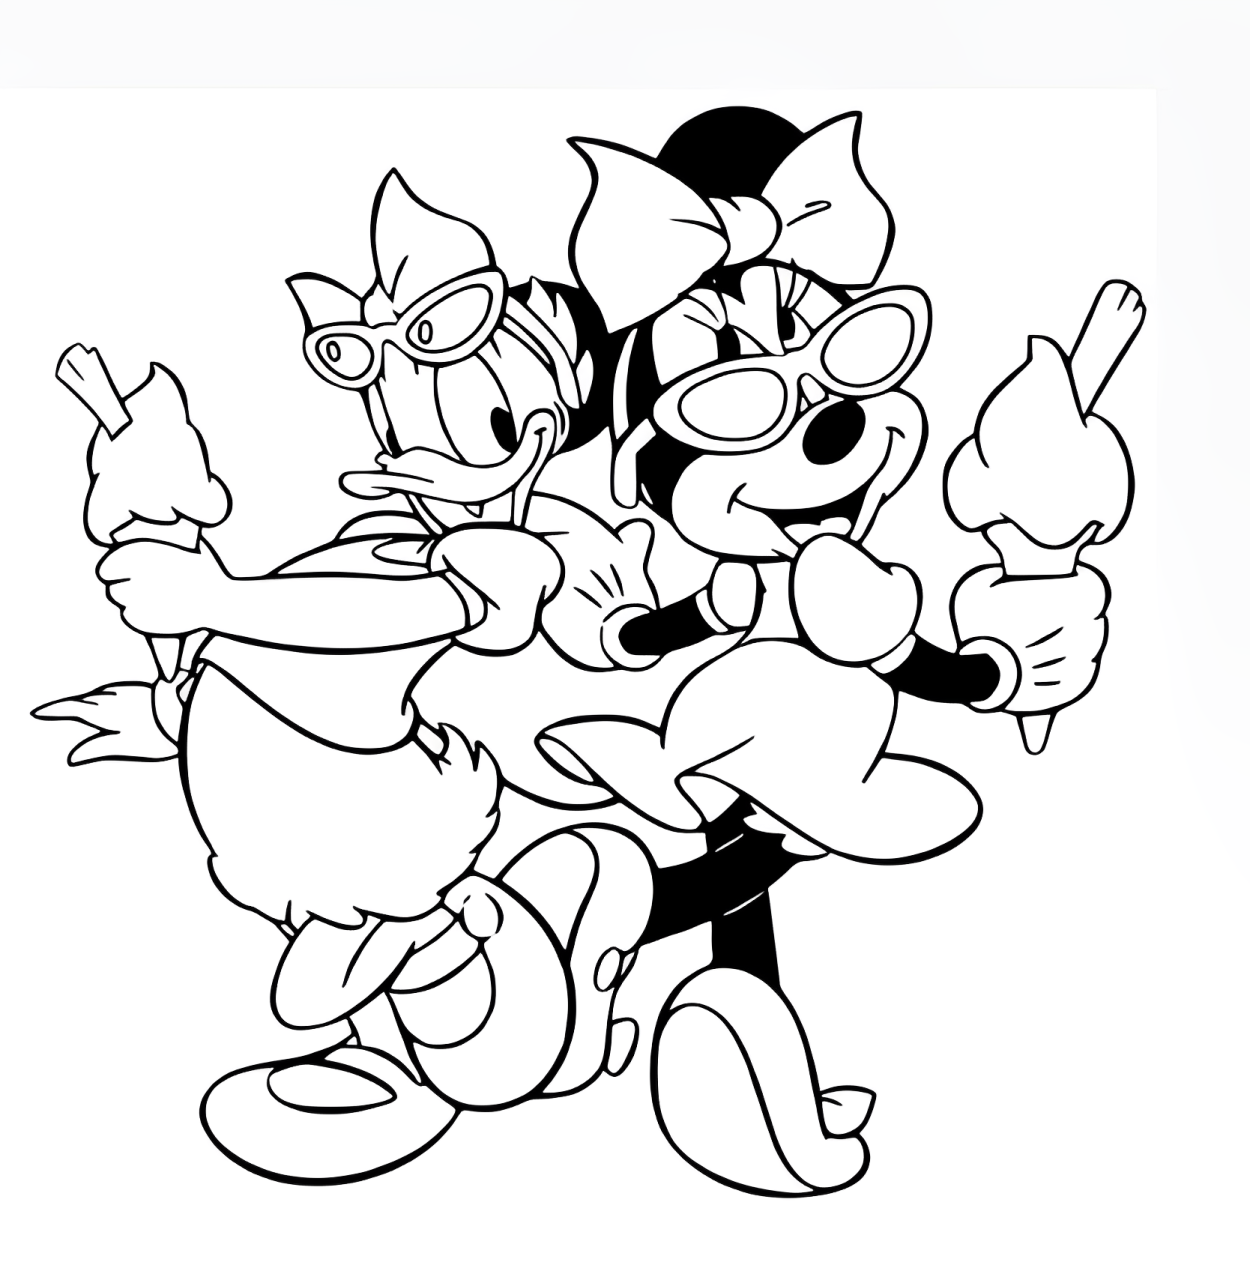 Disney Coloring Pages Free Online For Kids!